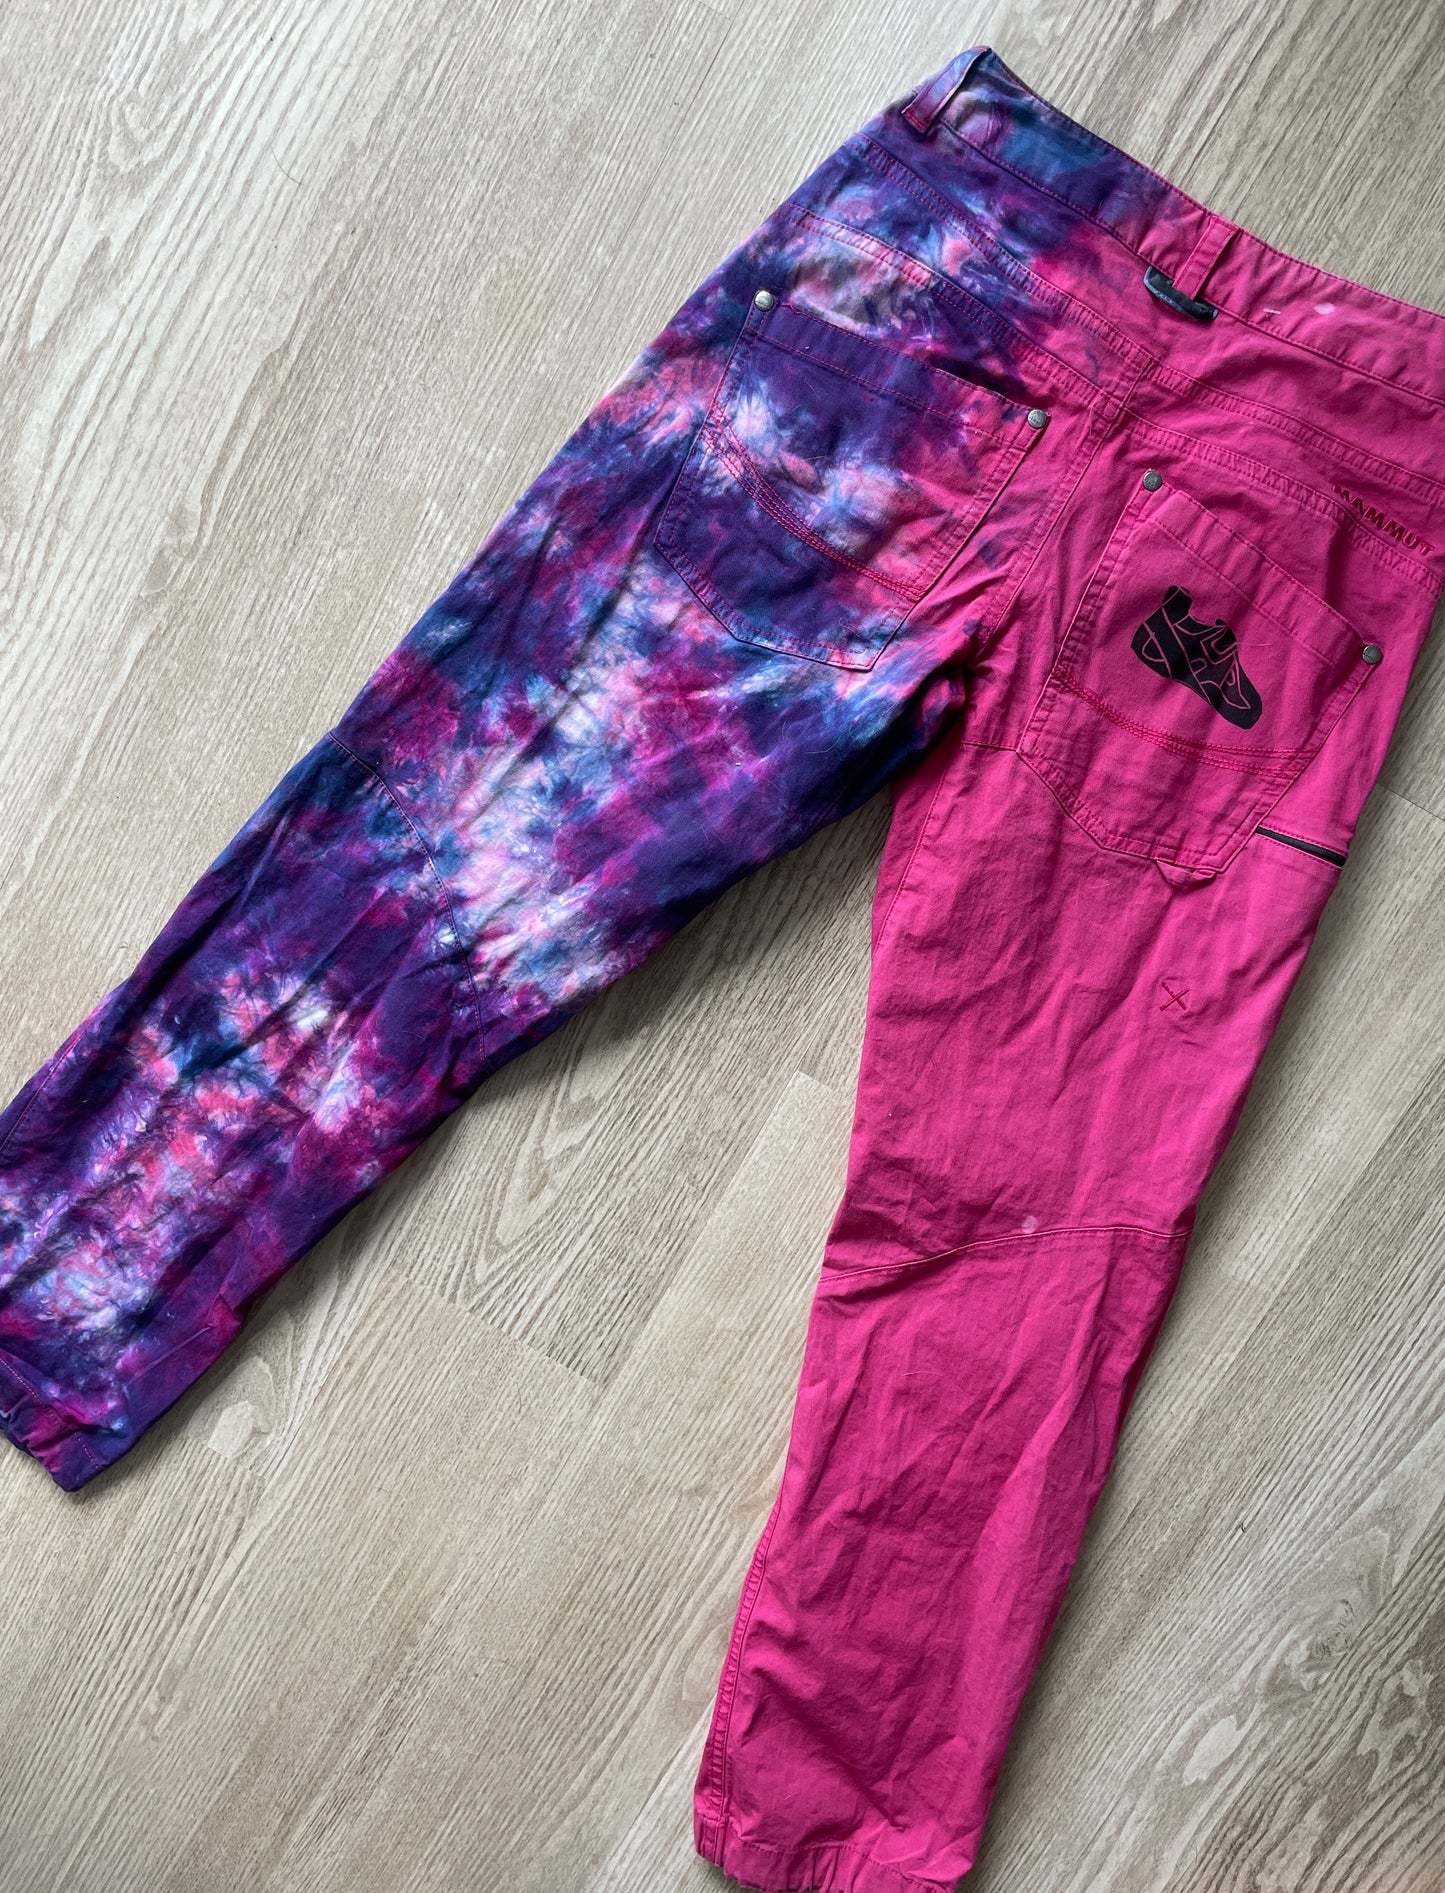 Women's Size 2 Mammut Tie Dye Climbing Pants | One-Of-a-Kind Upcycled Pink and Purple Pants